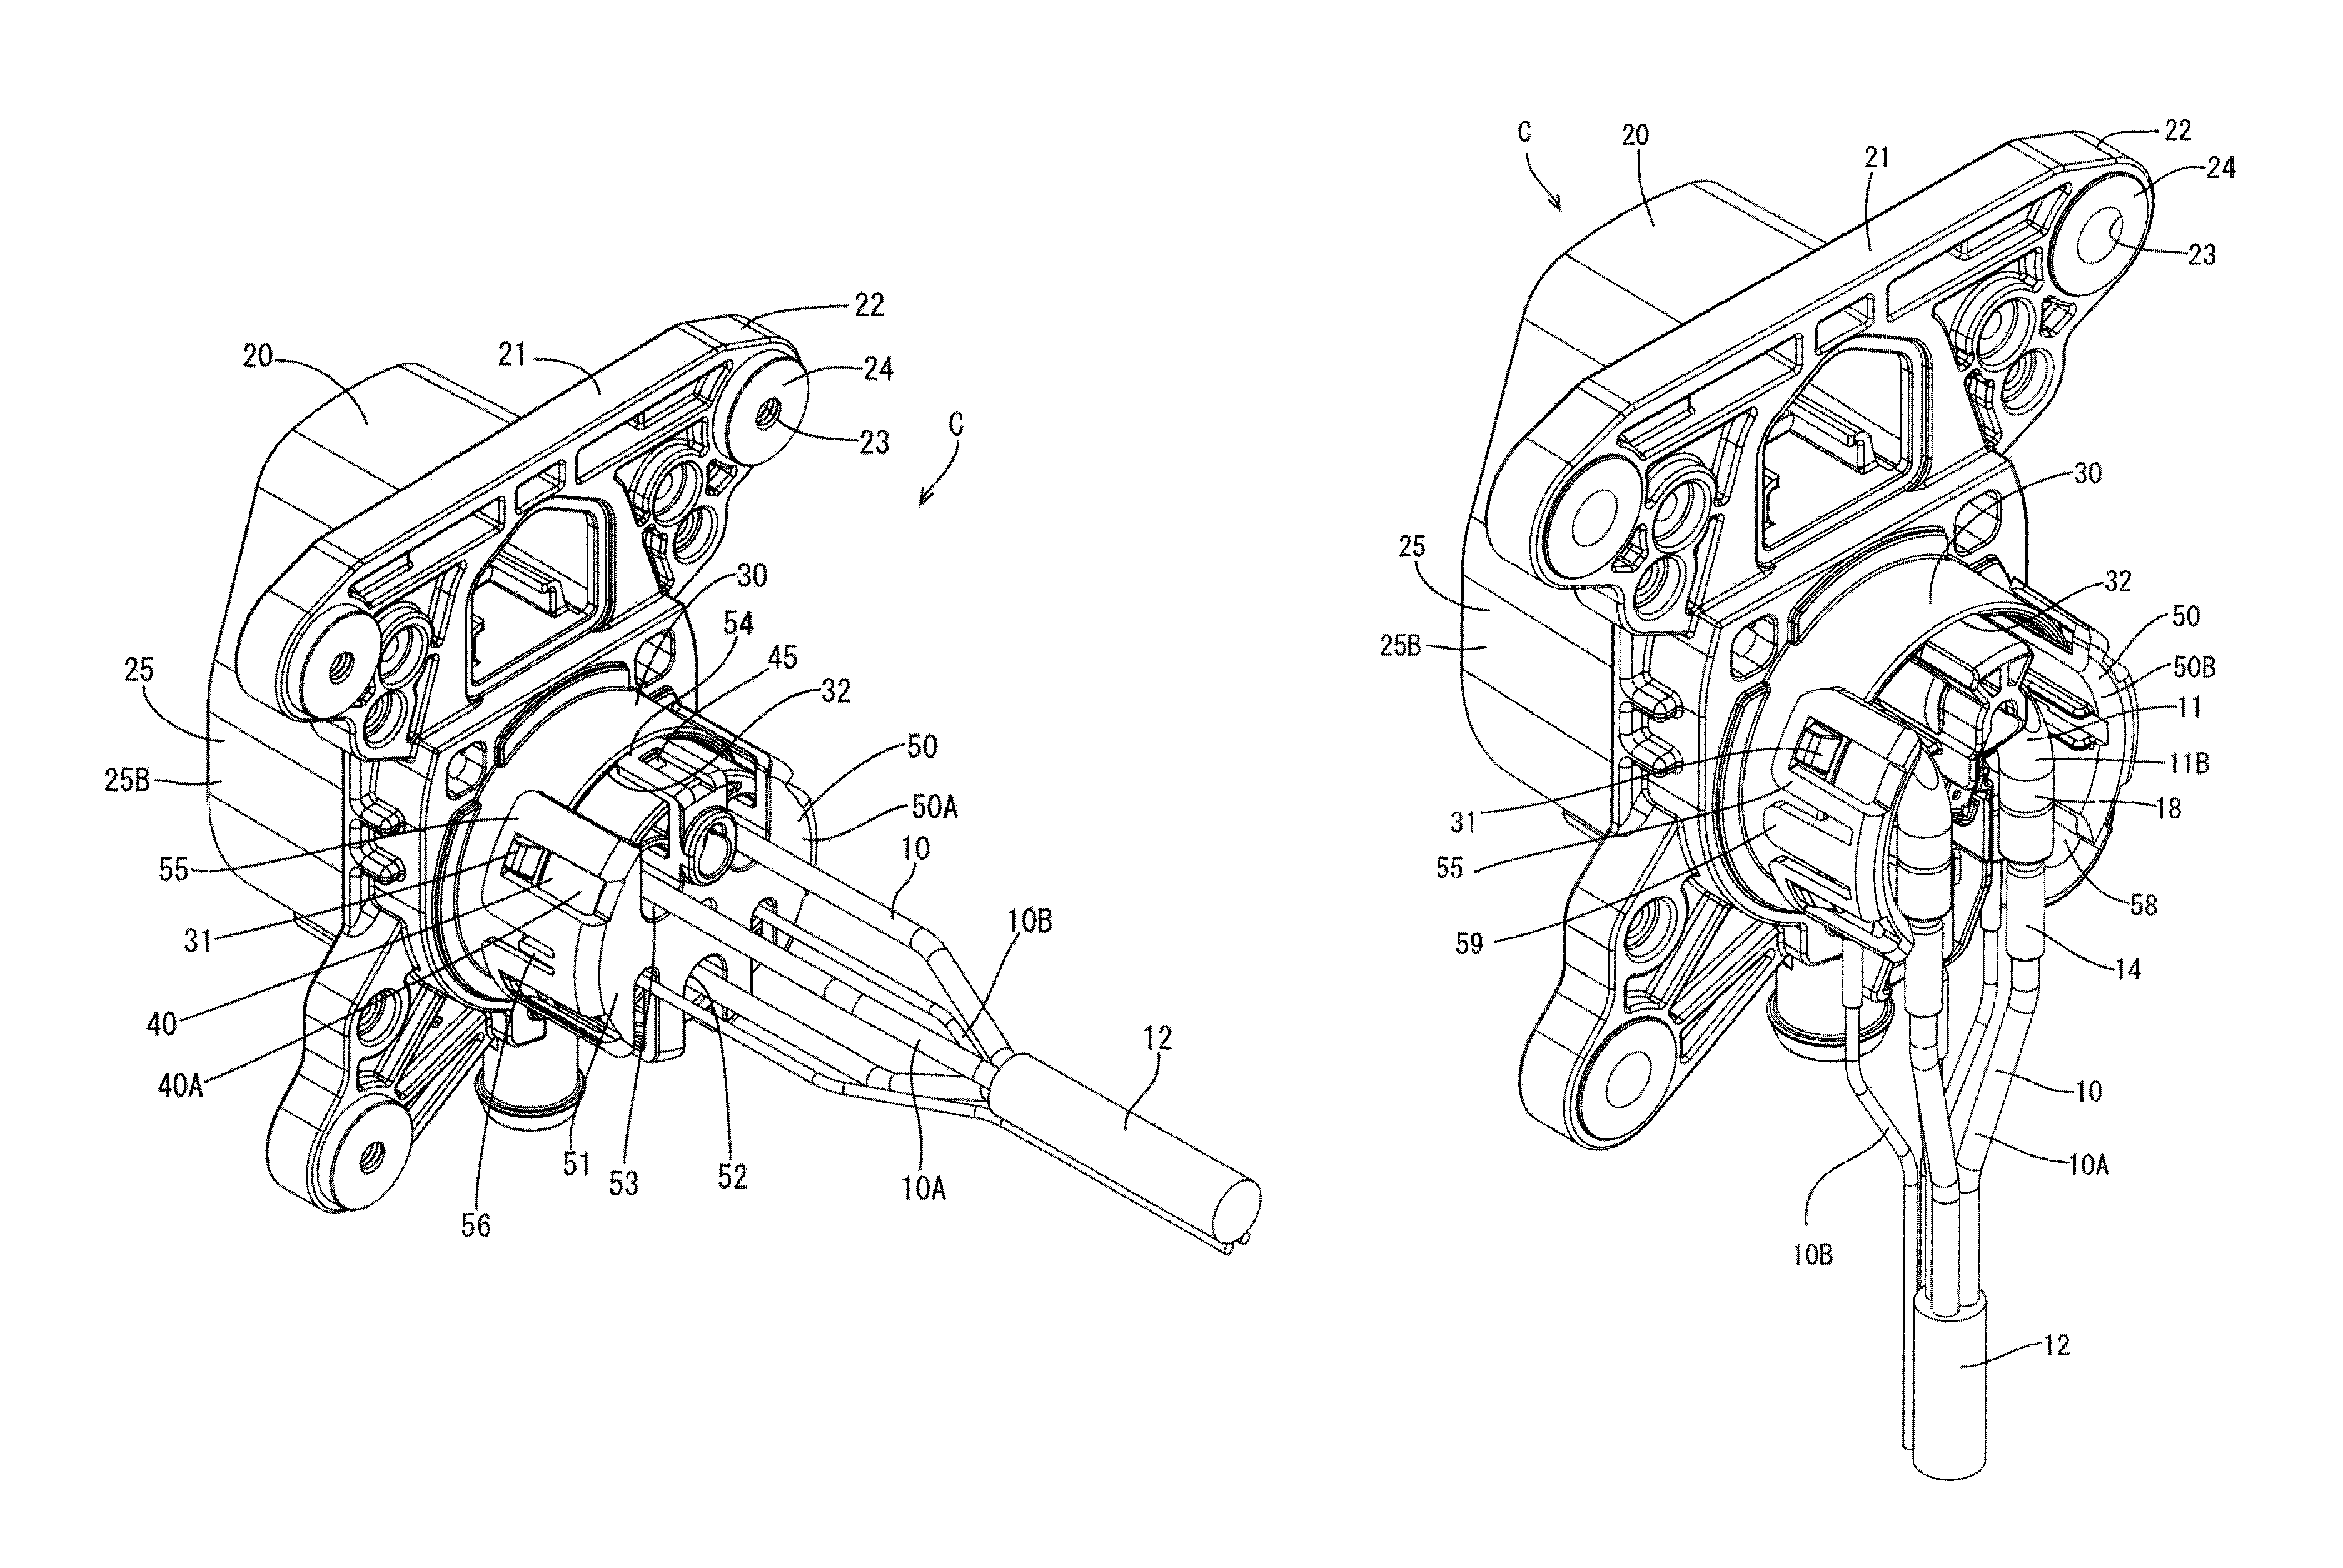 Vehicle-side connector having a housing with wire draw-out openings in different directions